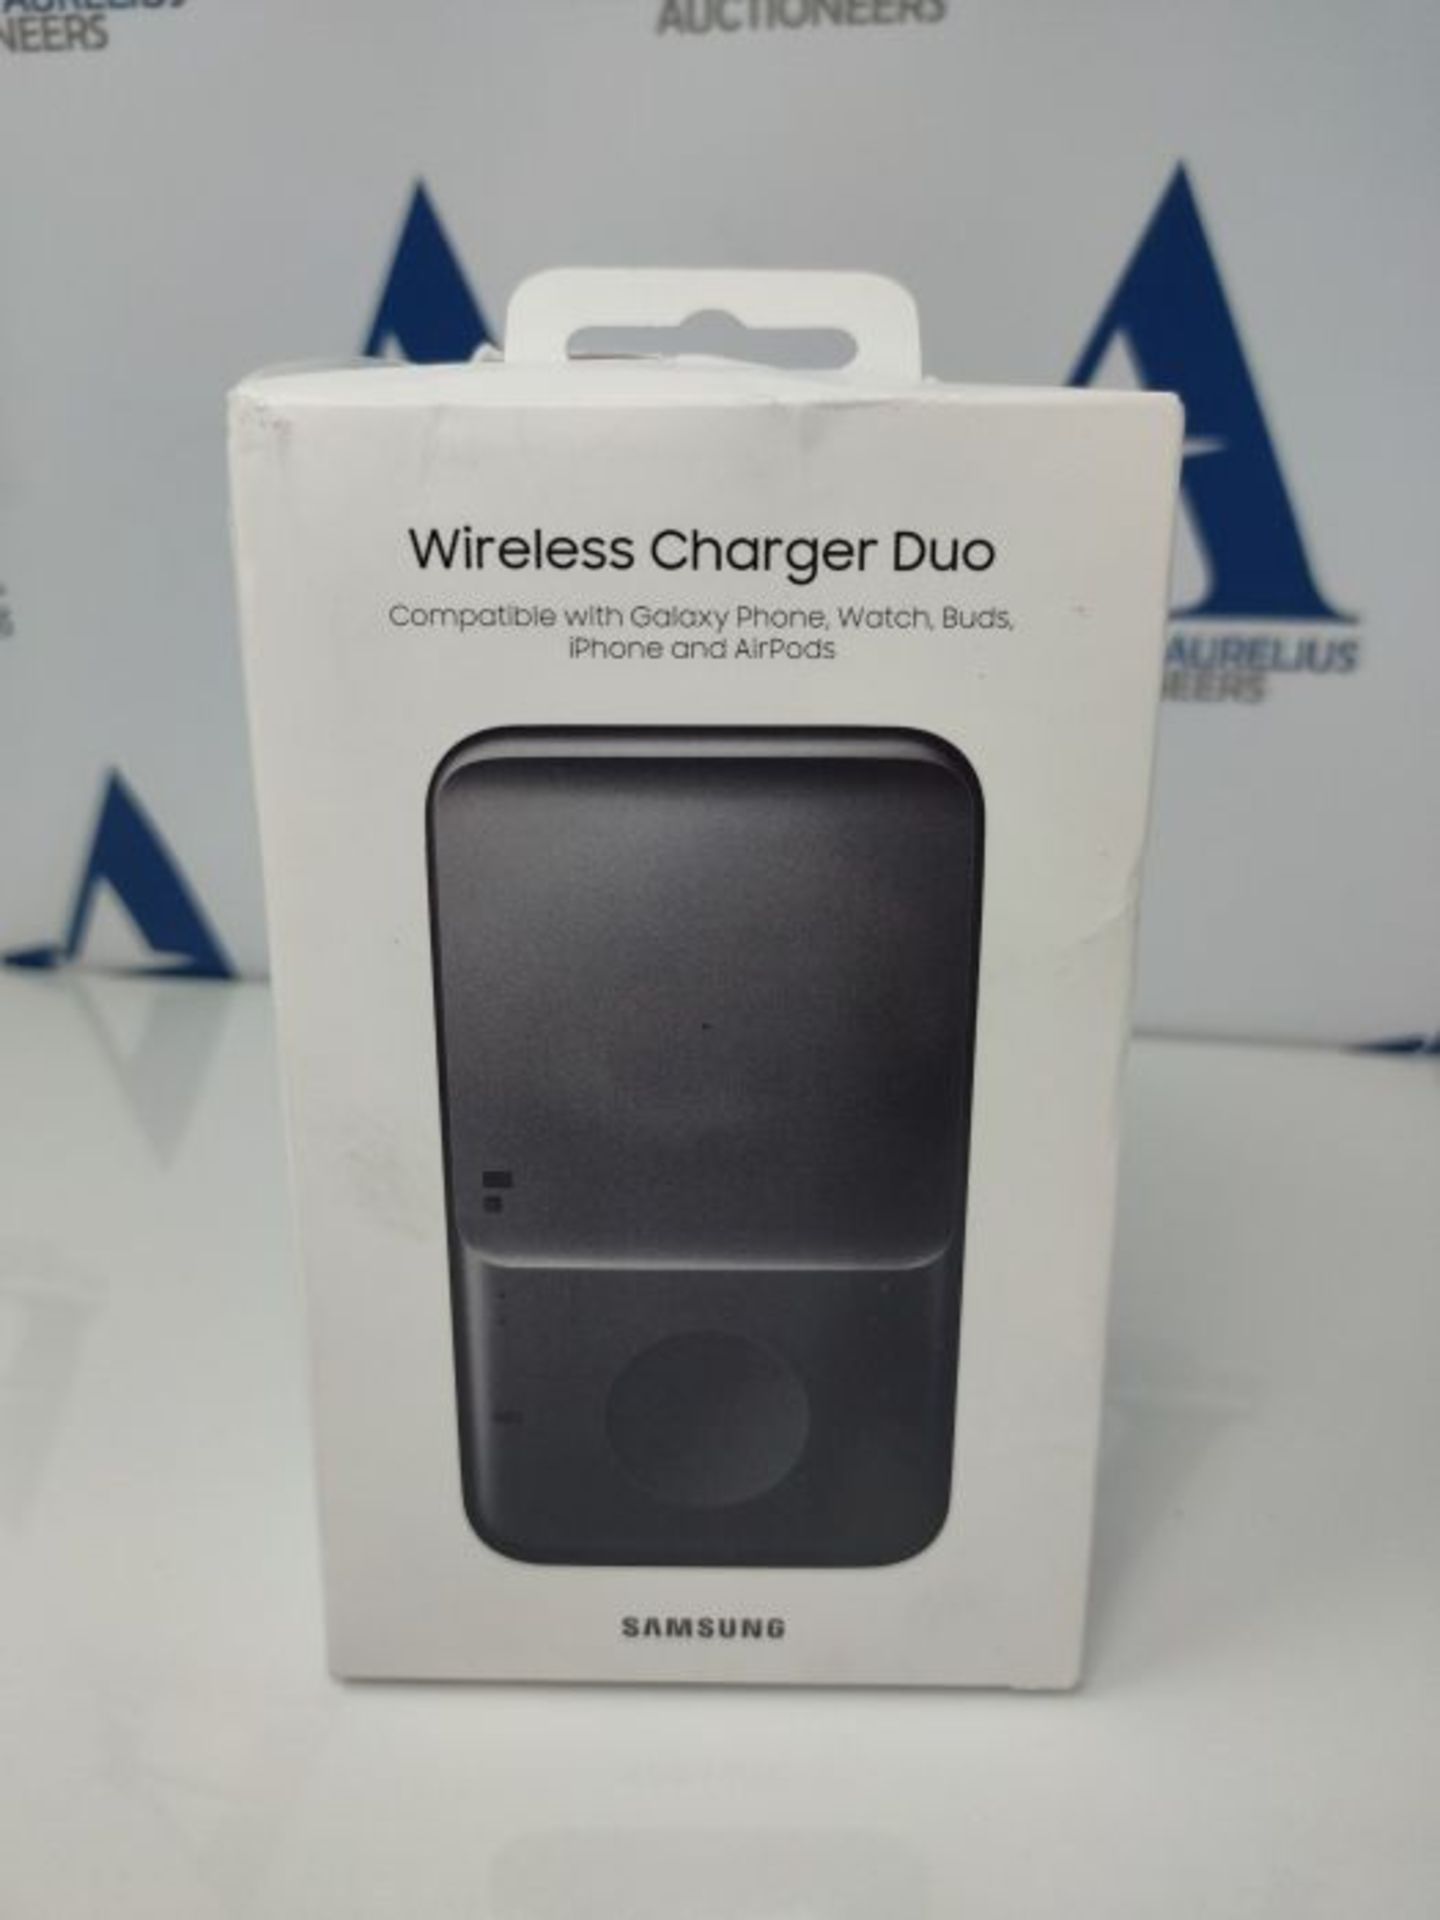 Samsung Wirelss Duo Charger - Samsung Official Fast Wireless Charging Pad Qi Enabled - - Image 2 of 3